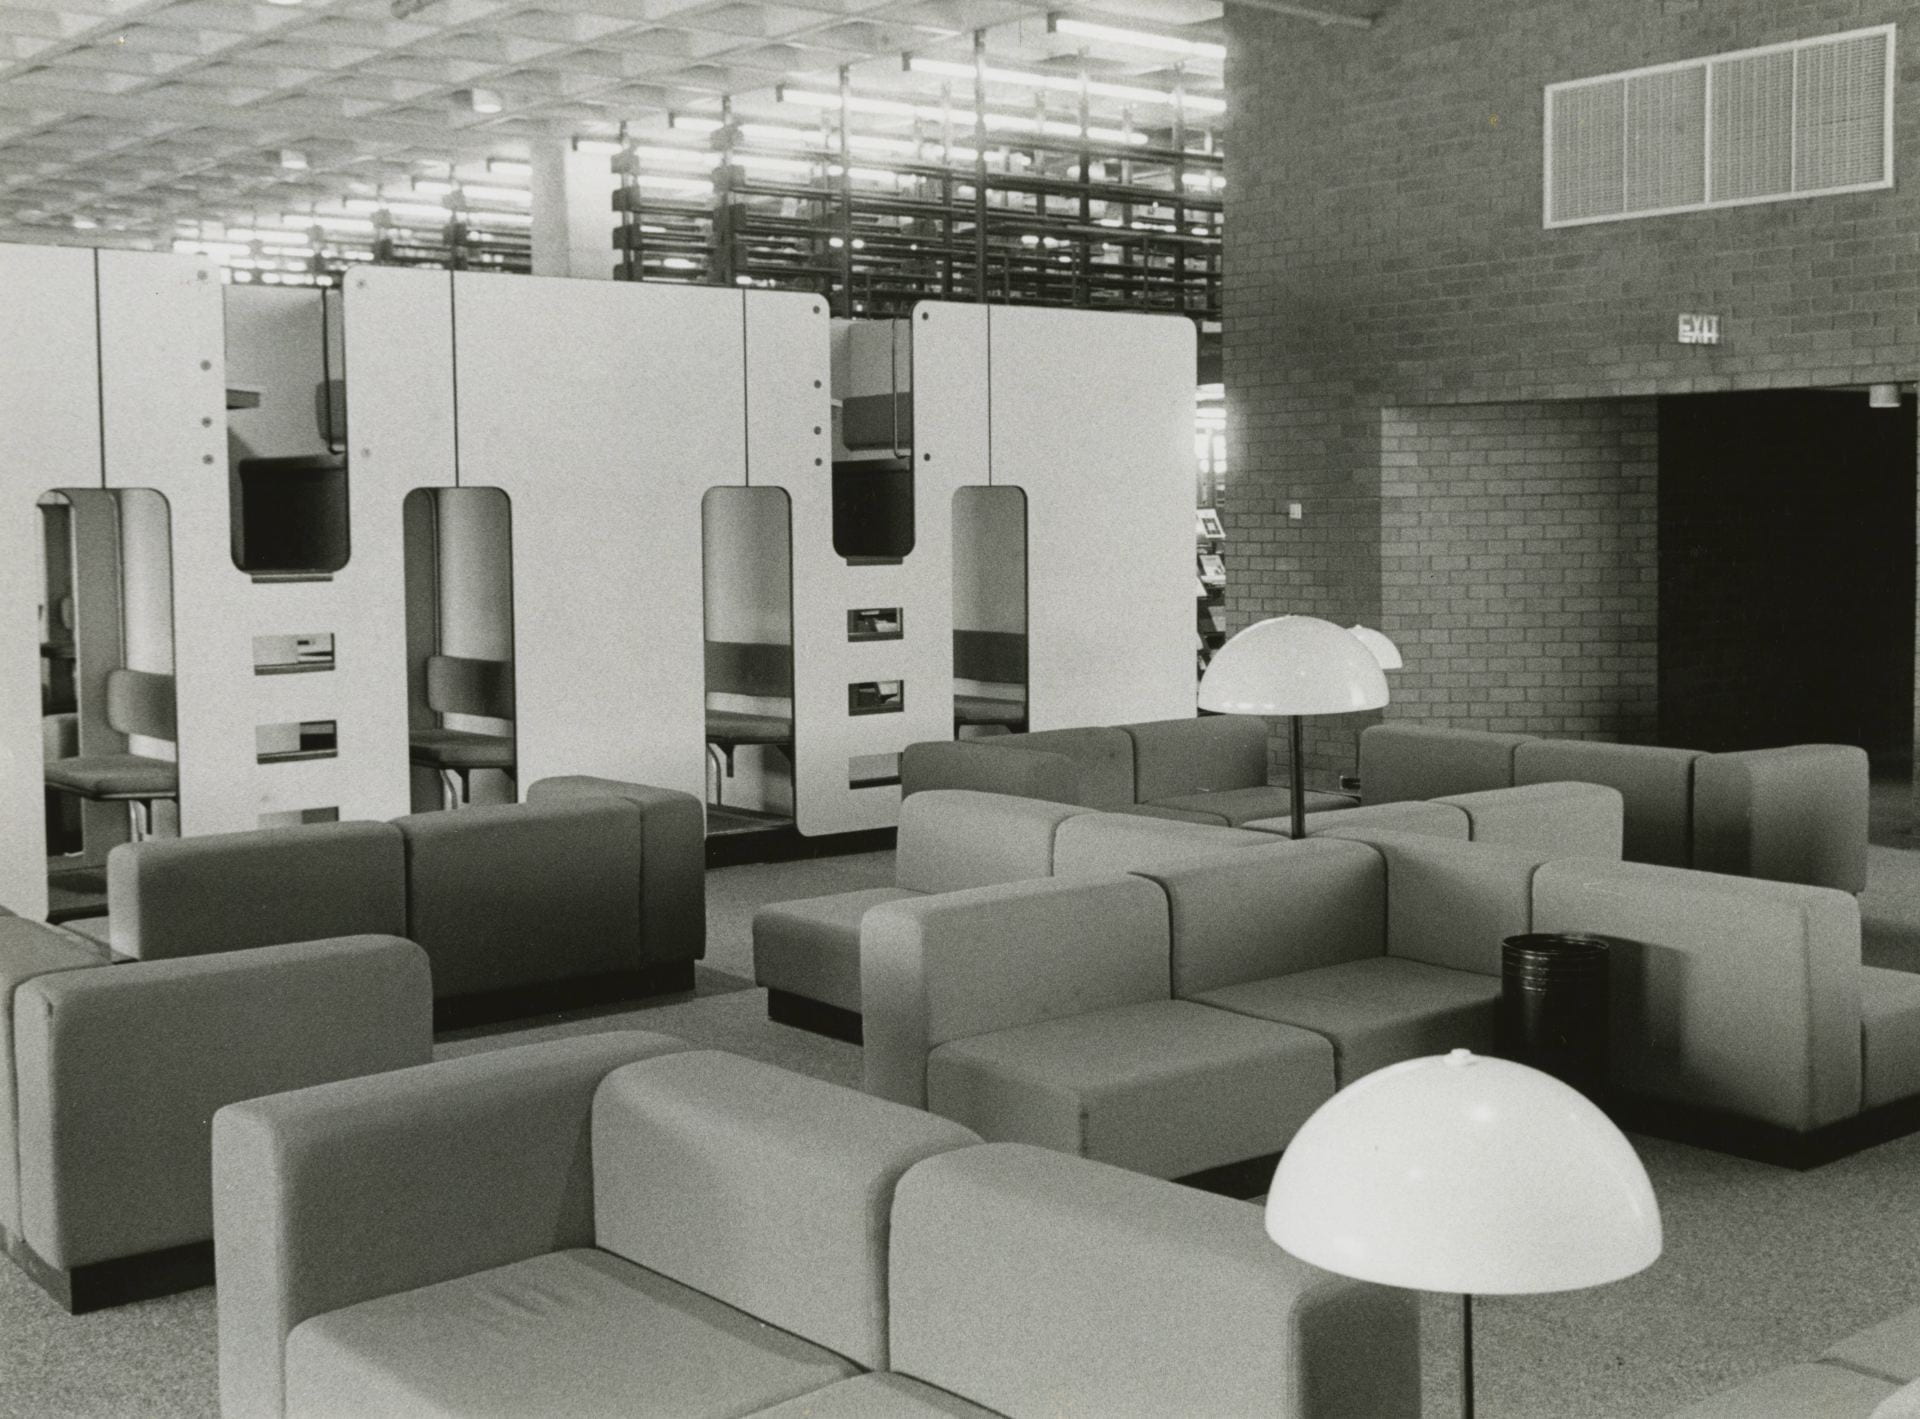 Black-and-white photo of couches, study cubicles, and lamps inside the Healey Library